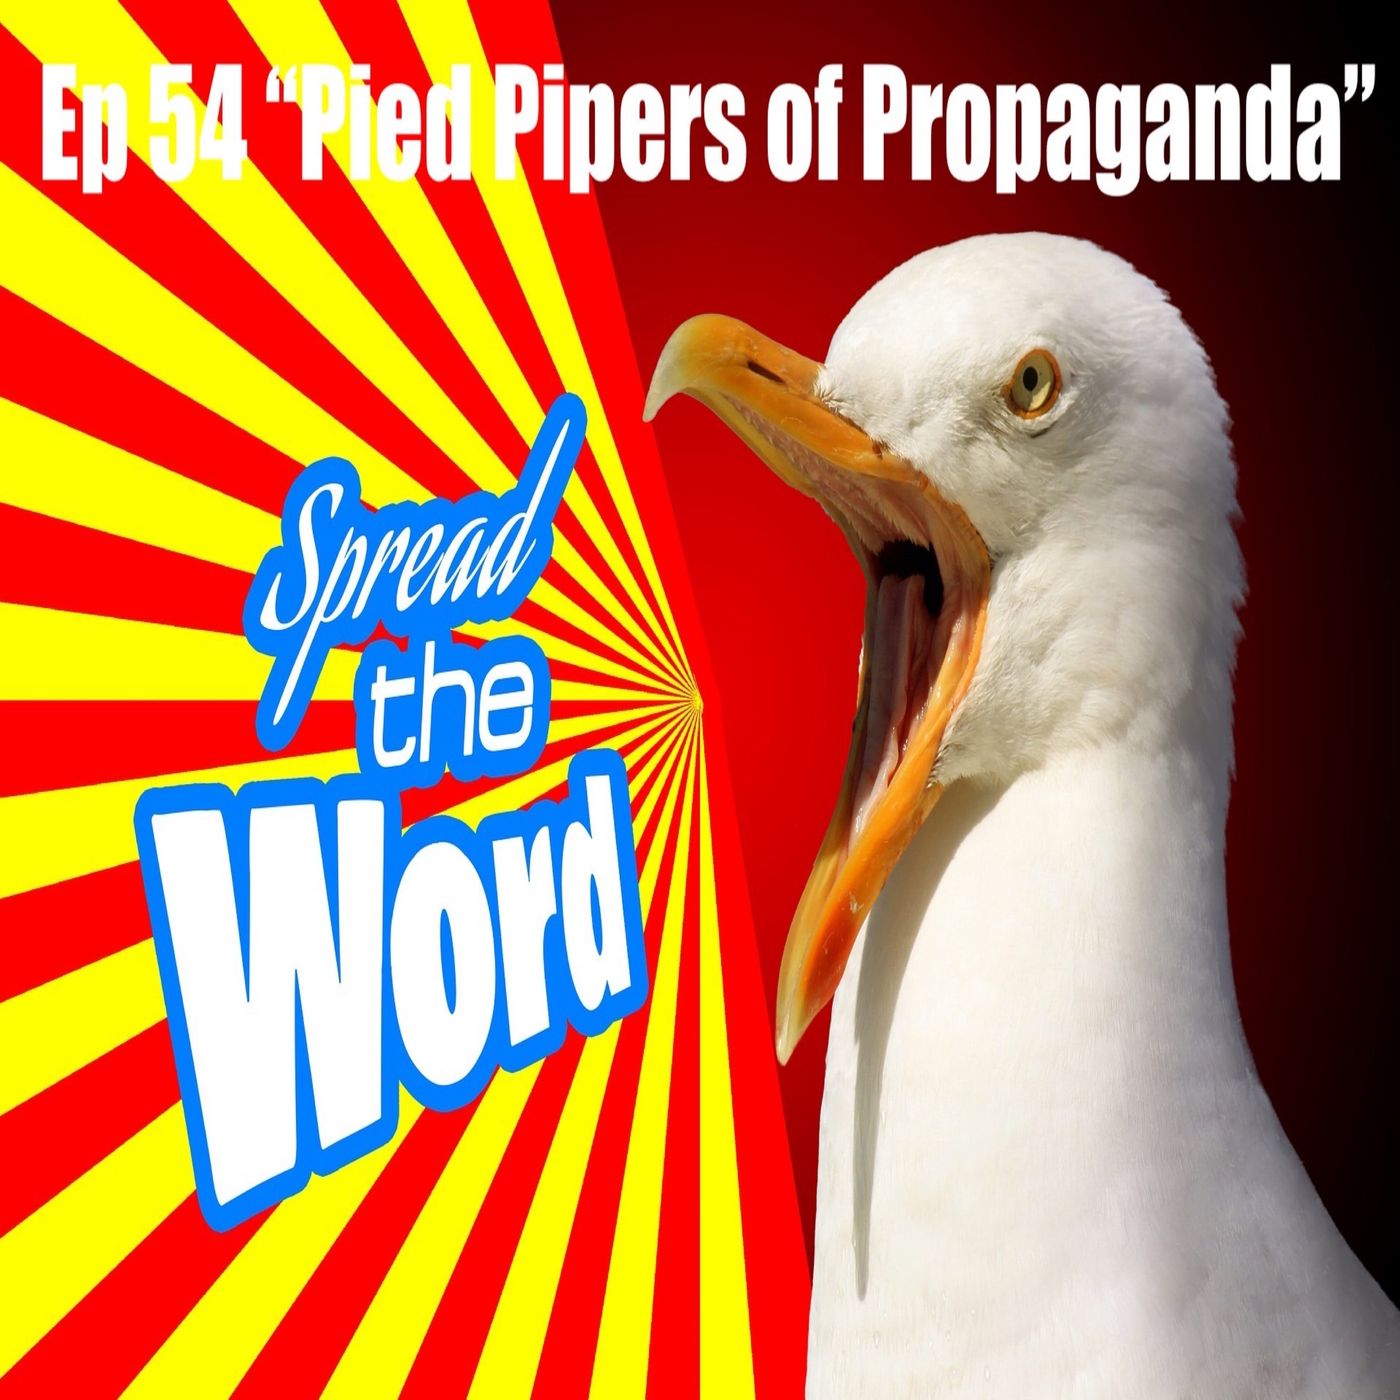 Ep 54 "Pied Pipers of Propaganda" pt 2